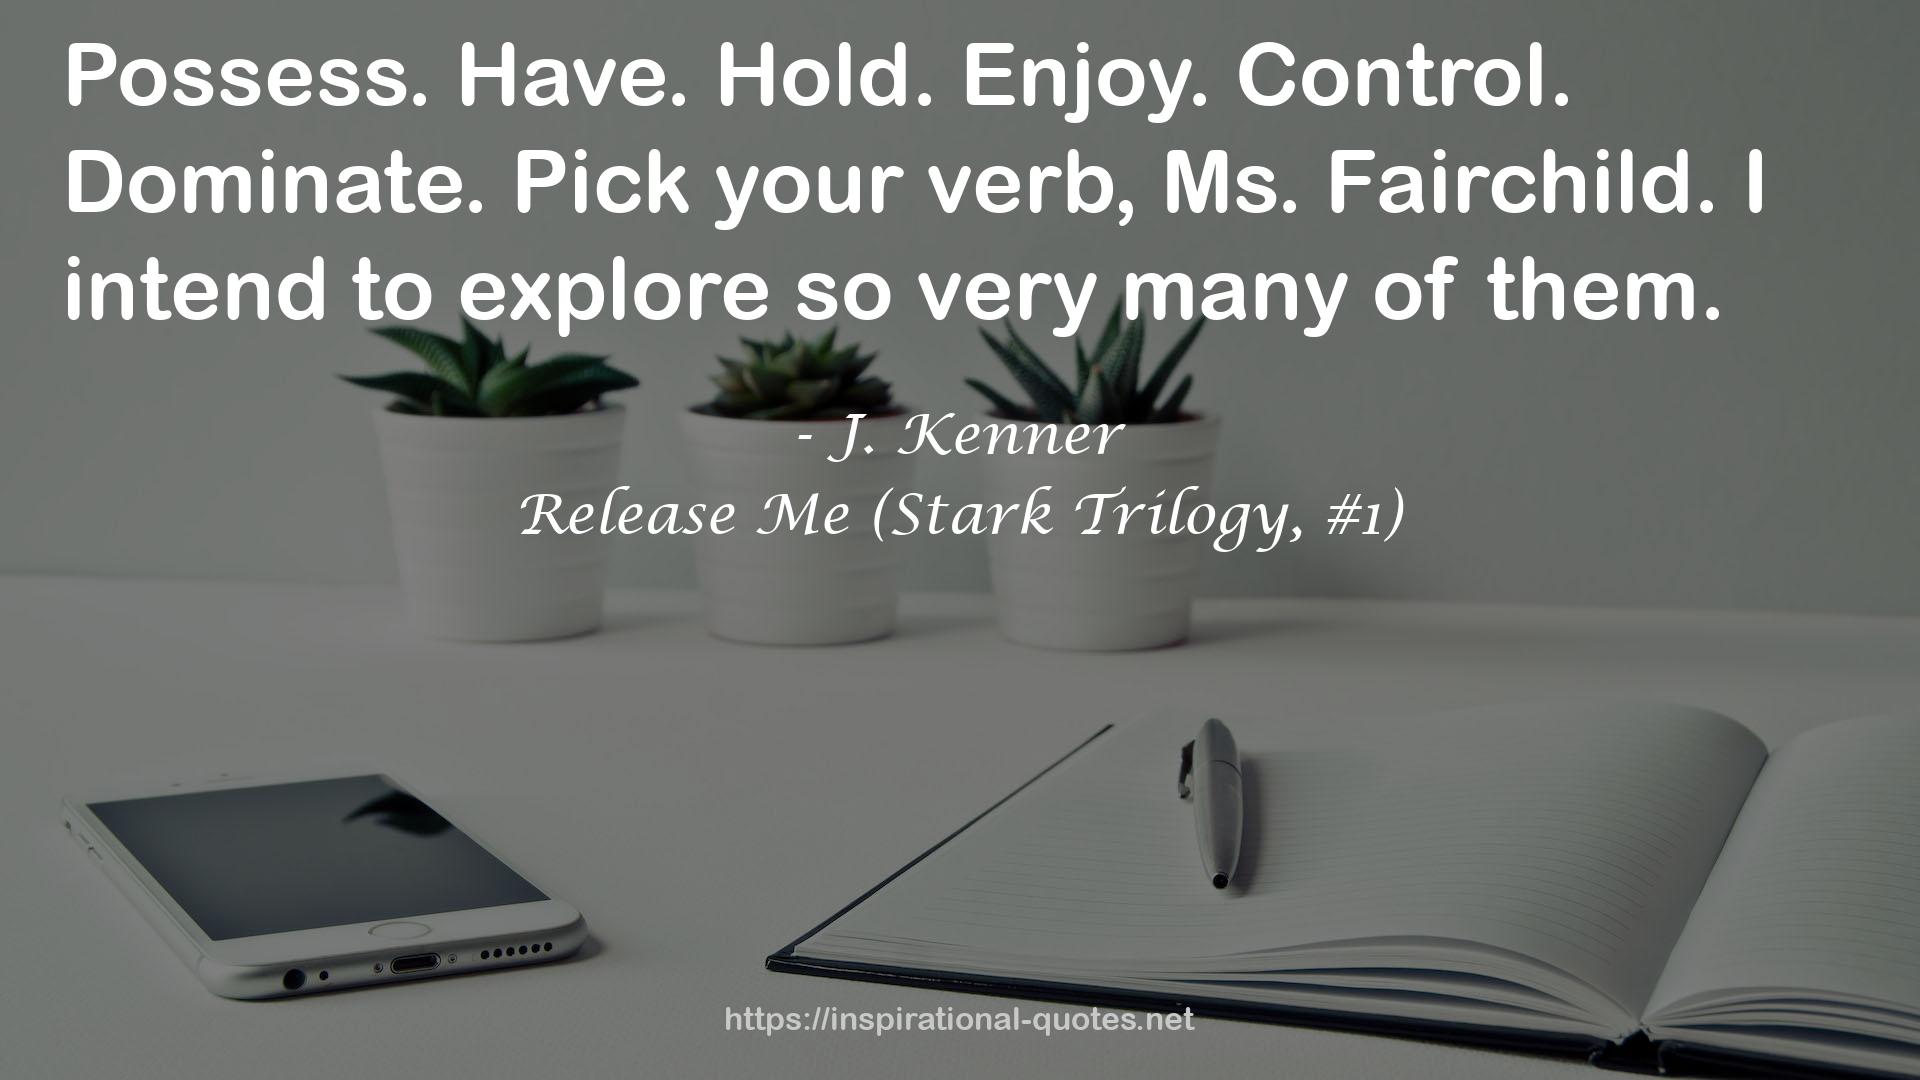 Release Me (Stark Trilogy, #1) QUOTES